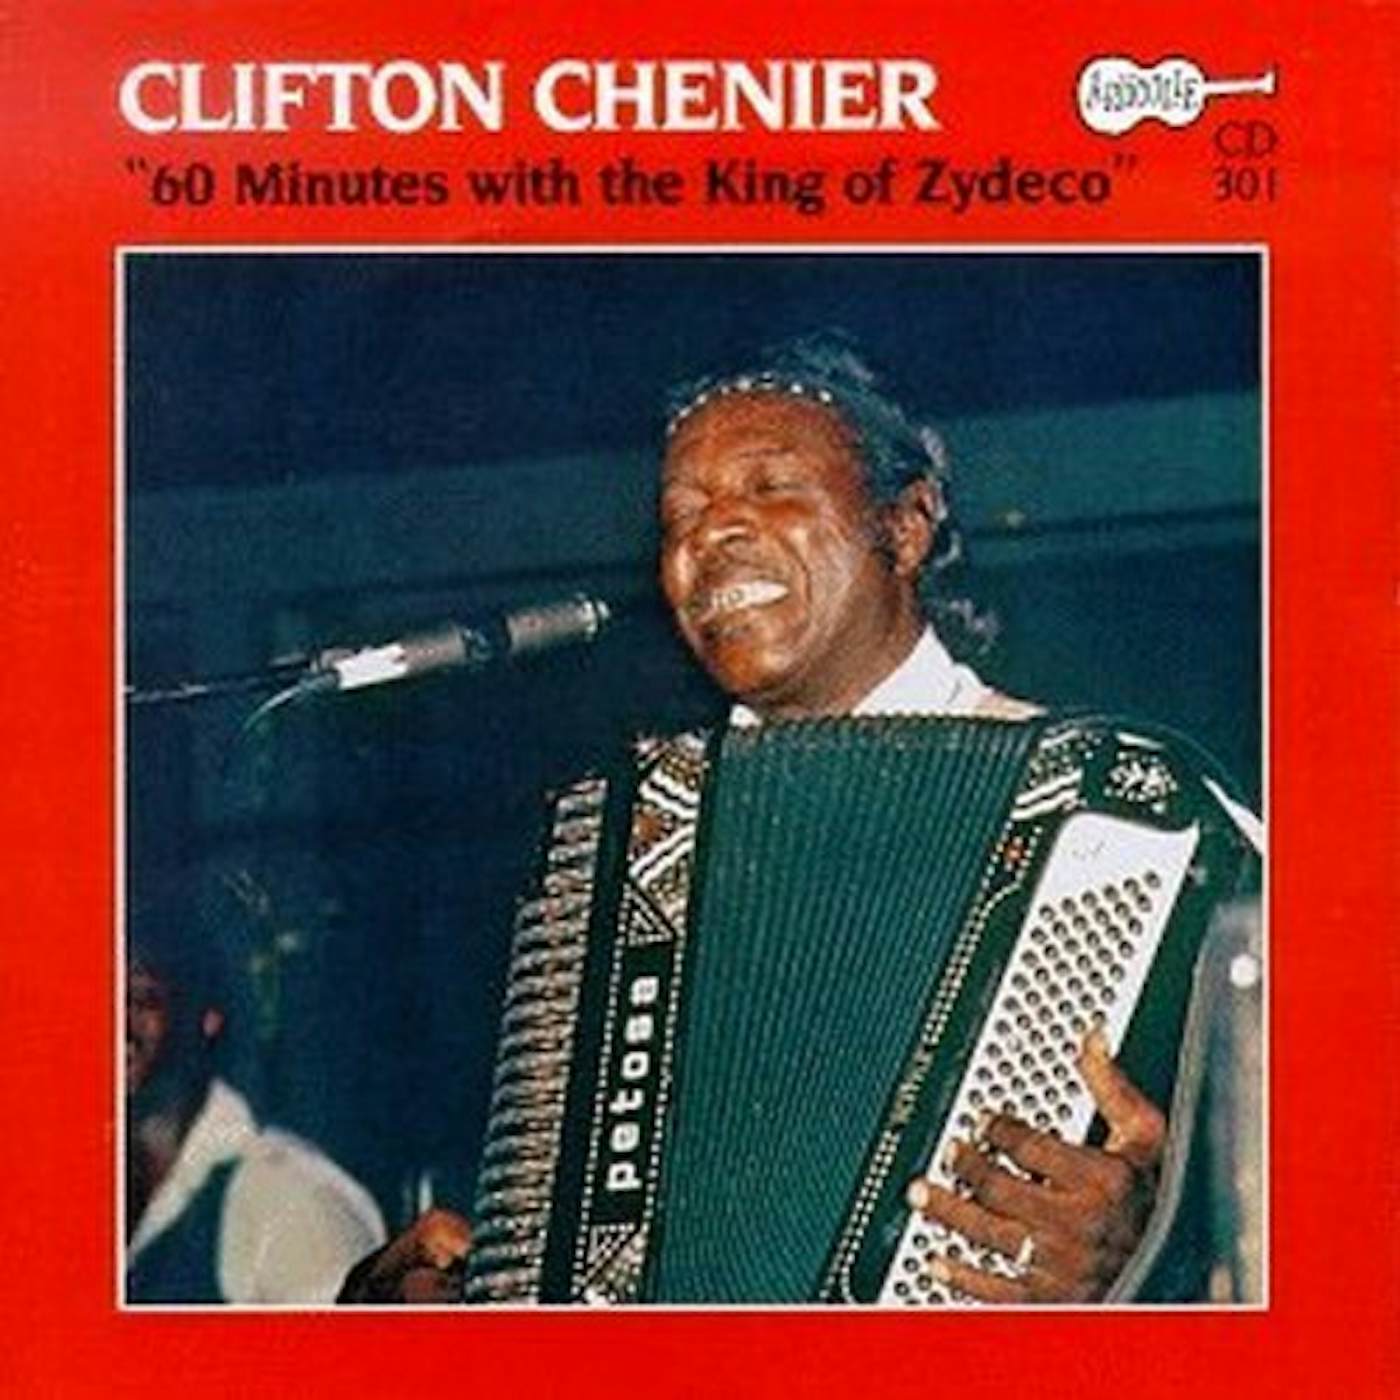 Clifton Chenier 60 MINUTES WITH THE KING OF ZYDECO CD